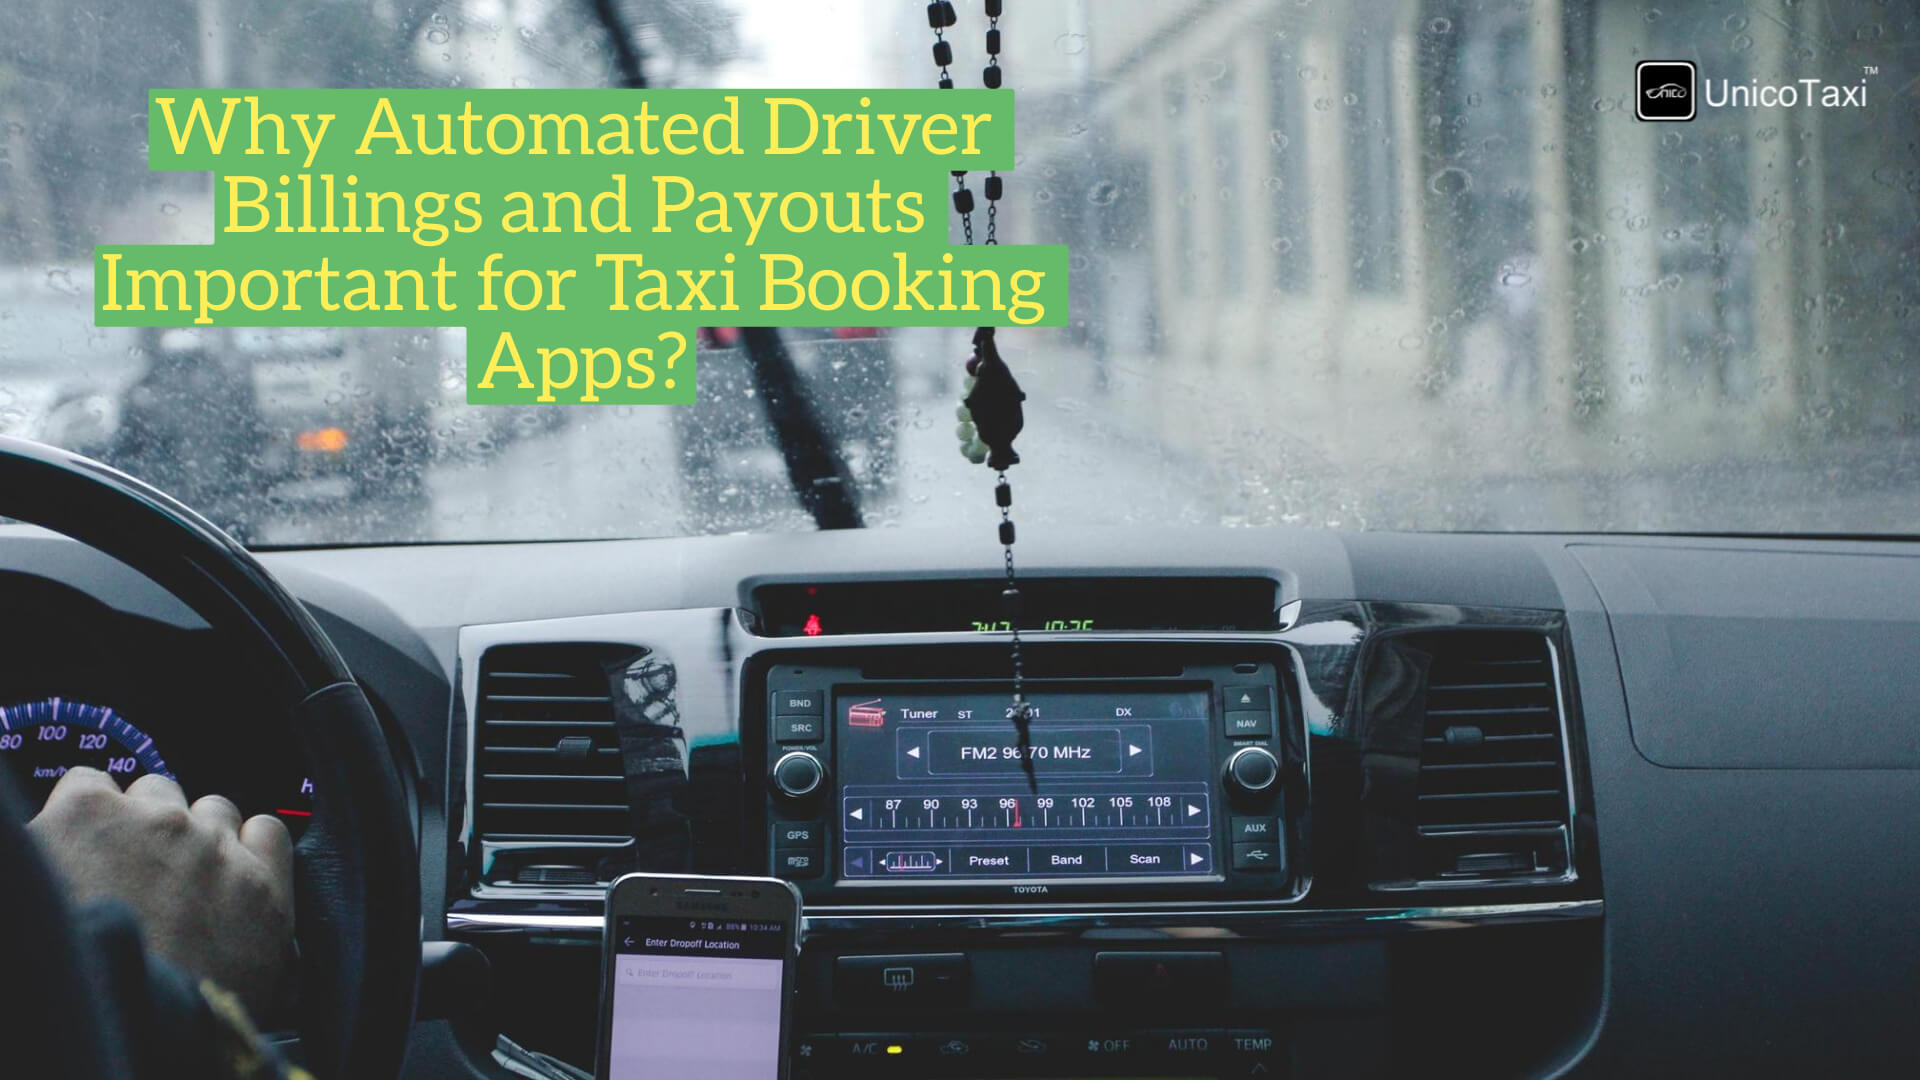 Why Automated Driver Billings and Payouts Important for Taxi Booking Apps?